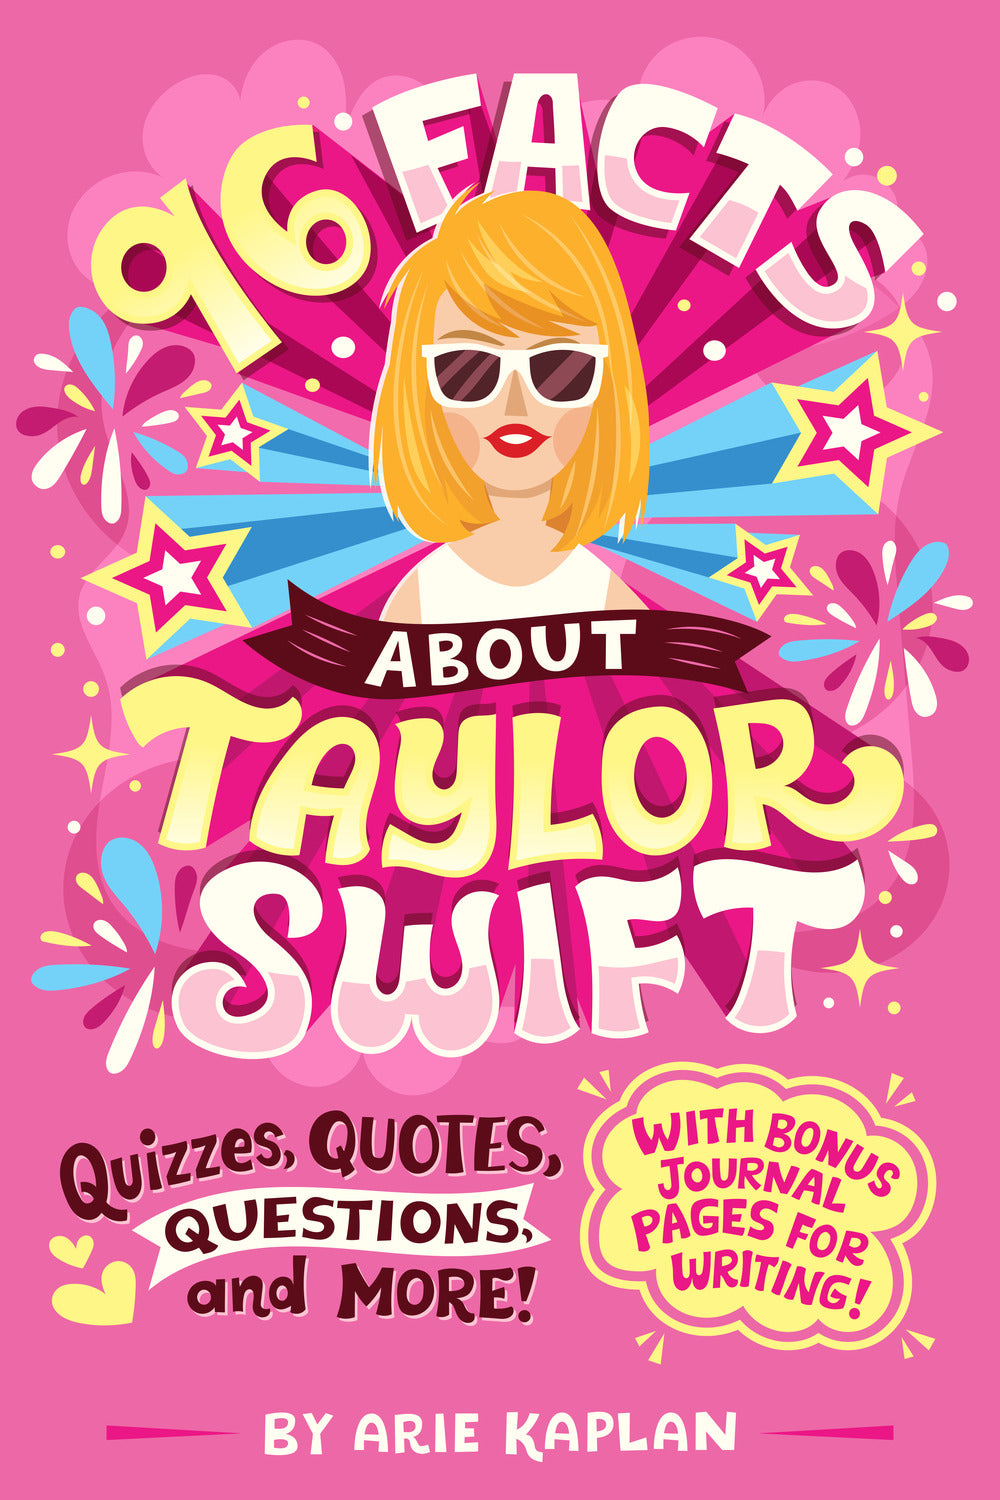 96 Facts About Taylor Swift: Quizzes, Quotes, Questions, and More!